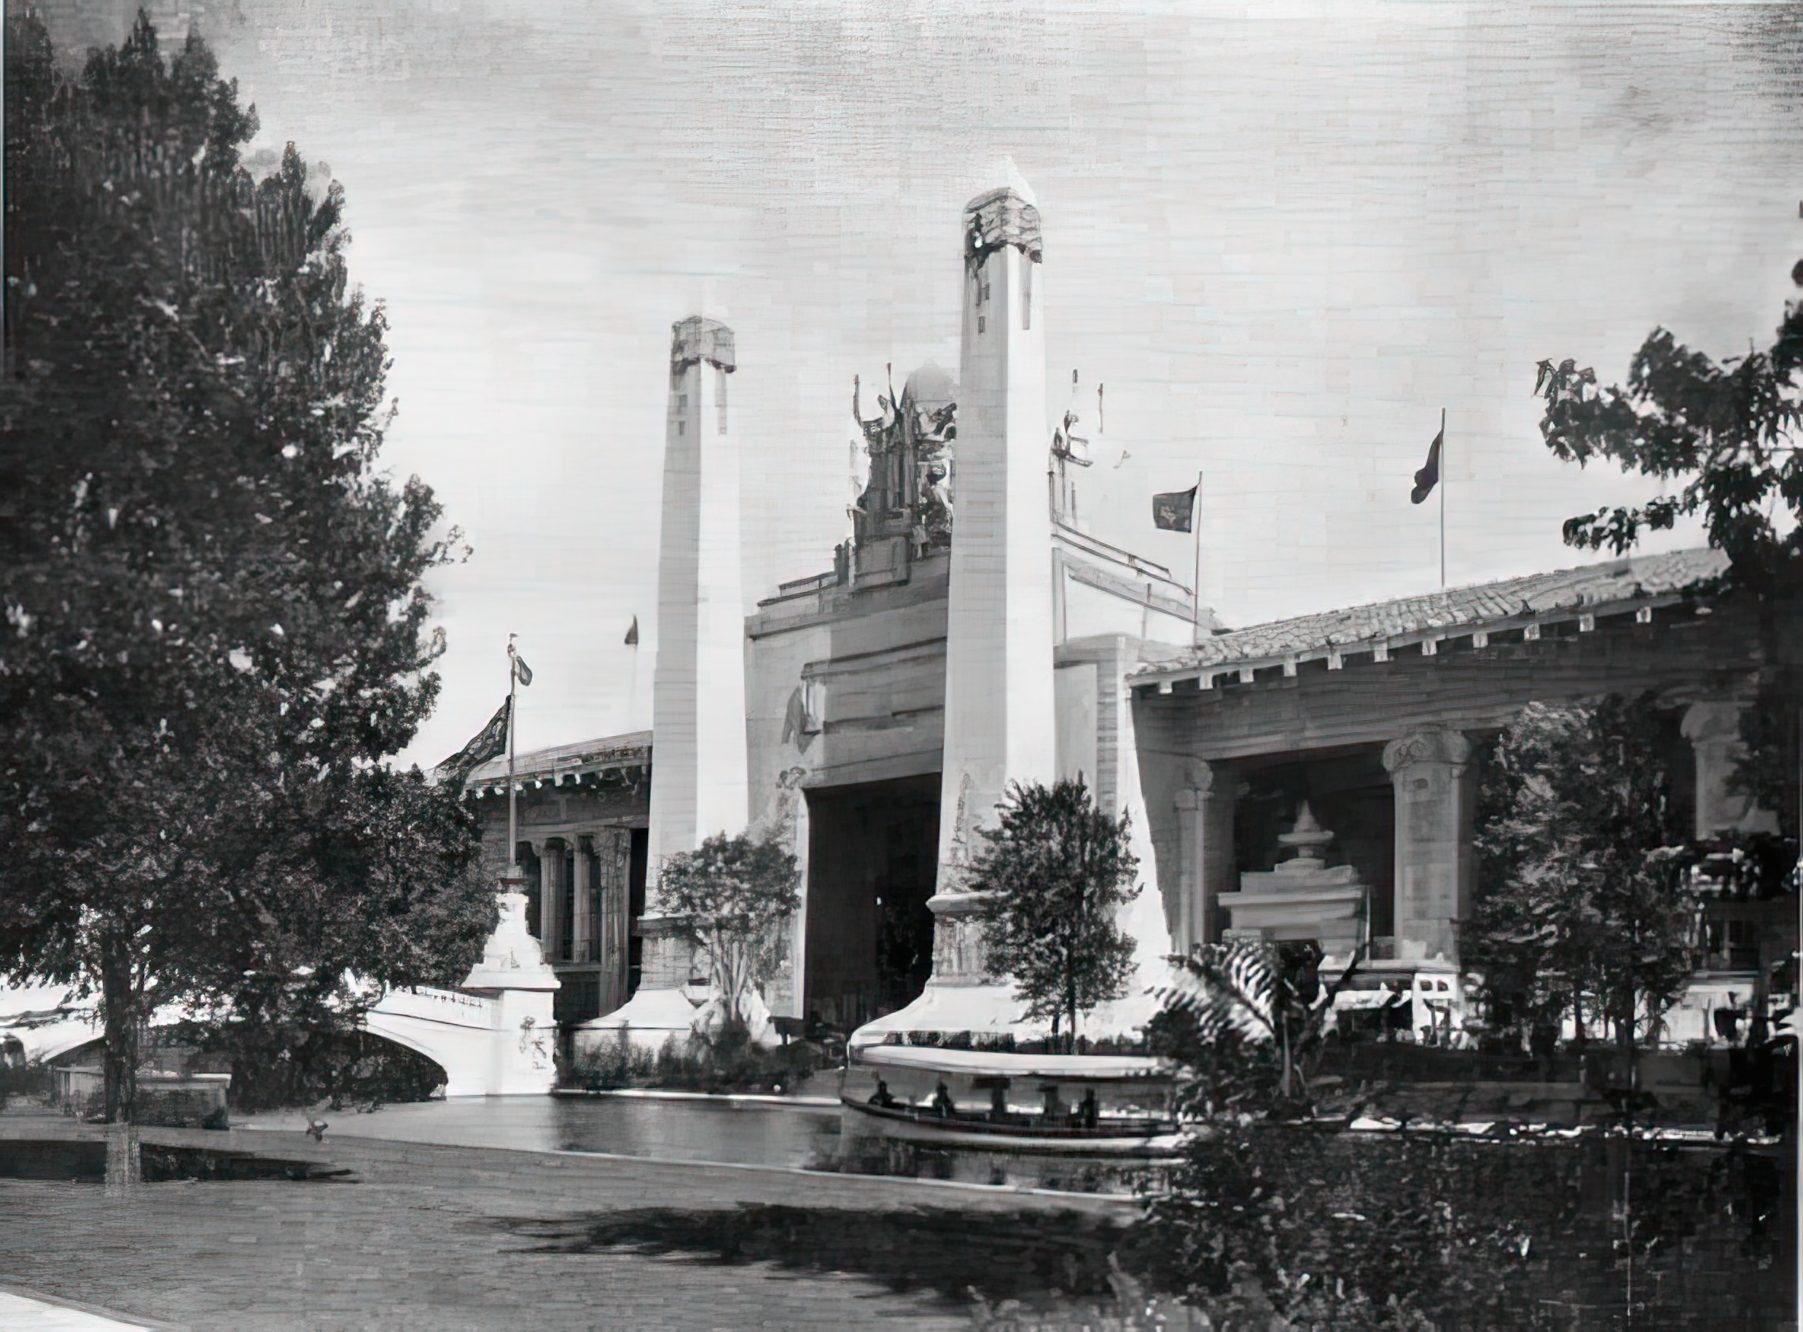 Black and white photograph of the Metallurgy Building at the 1904 World's Fair in St. Louis.